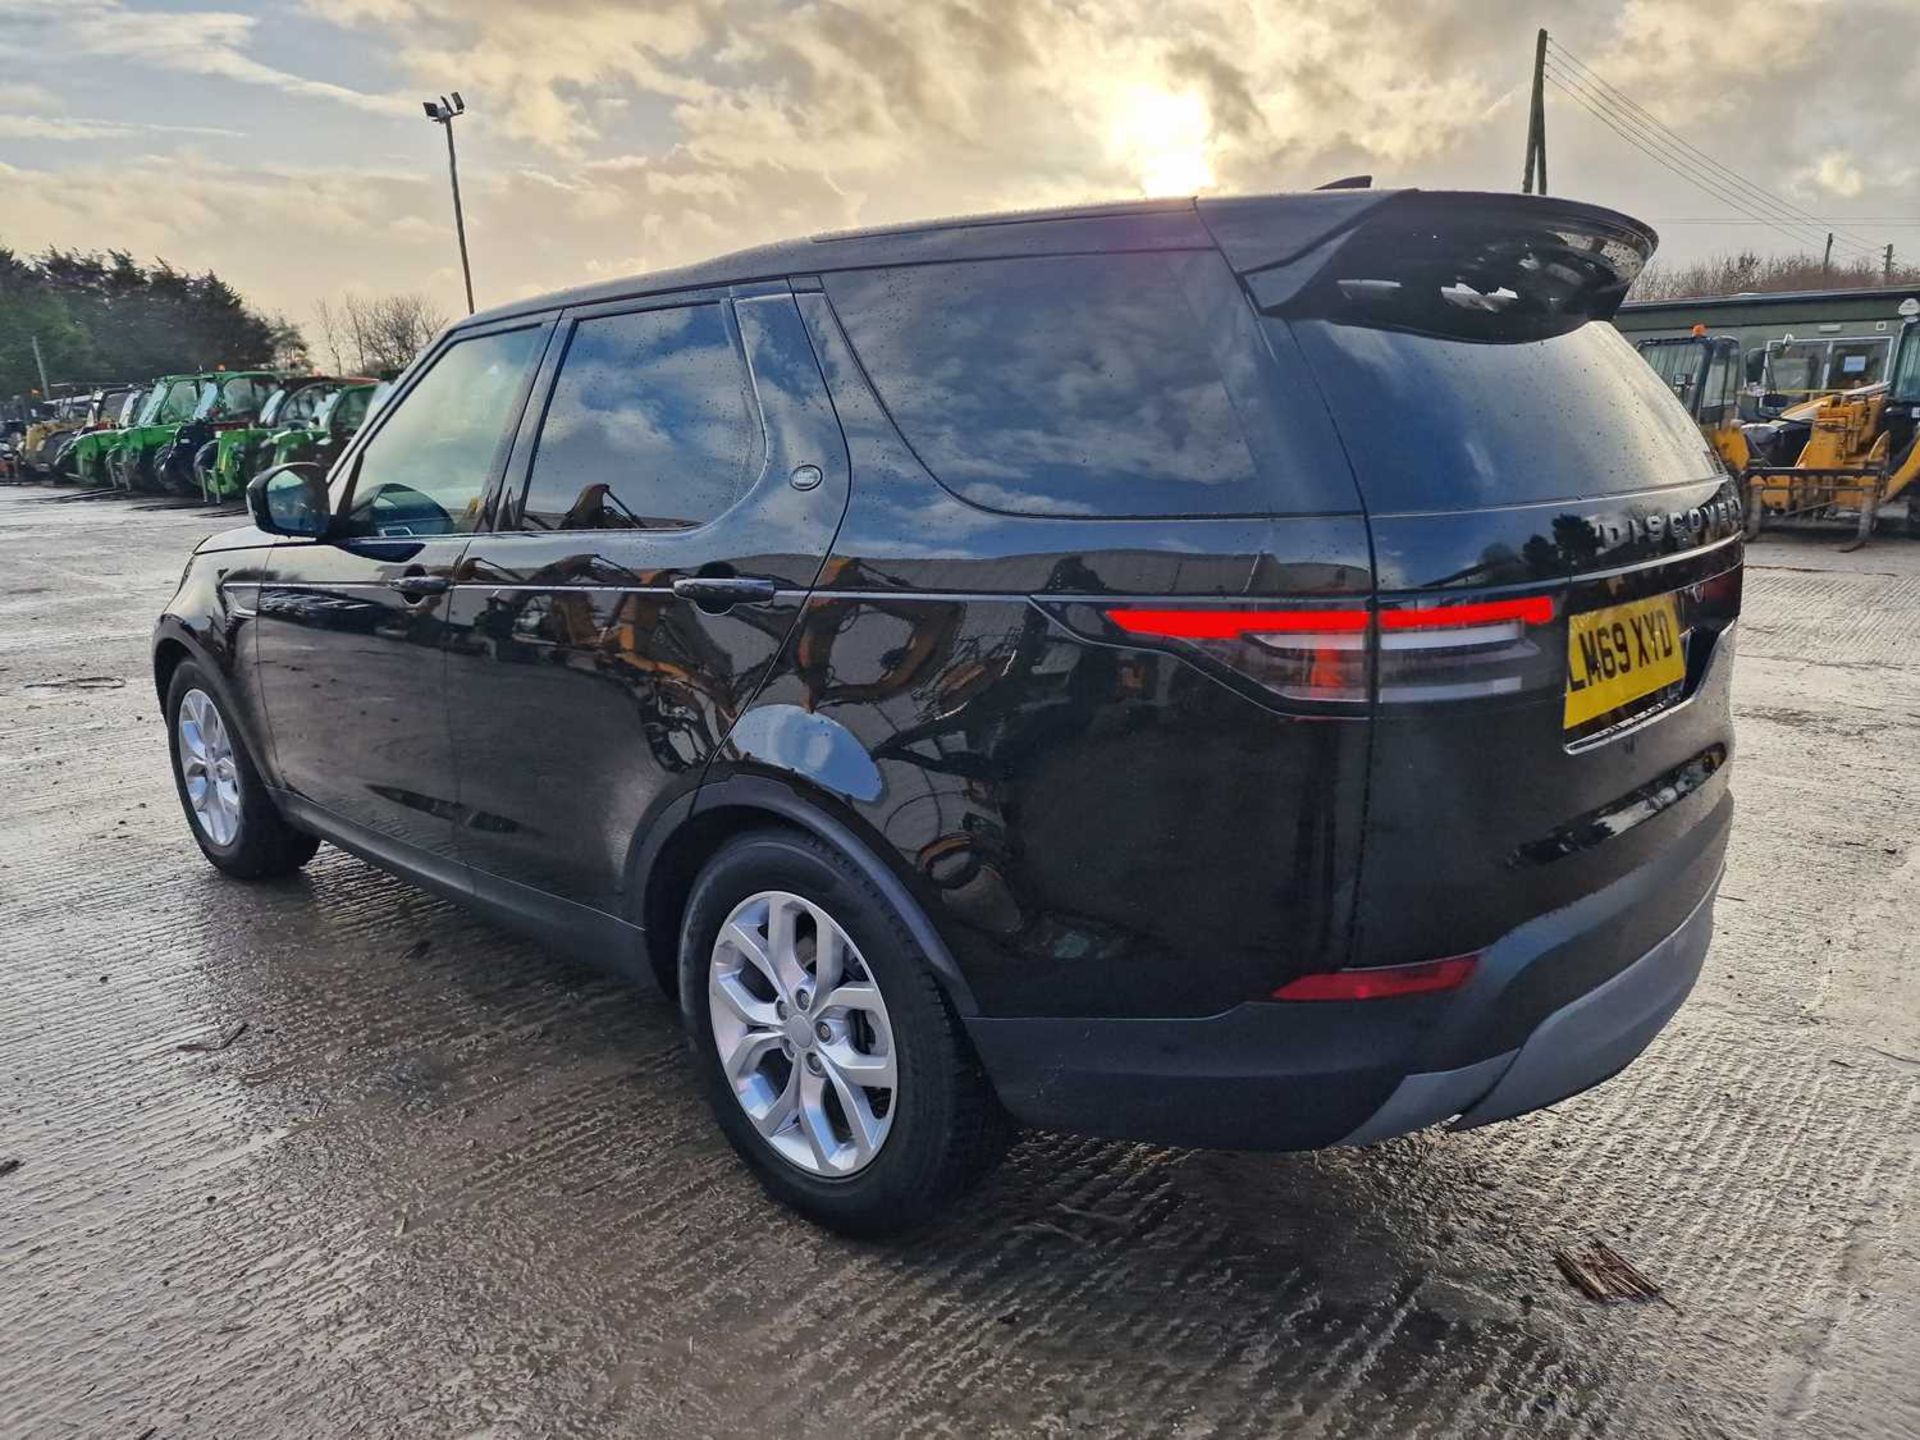 2019 Landrover Discovery SD4 SE 240 Commercial, Auto, Paddle Shift, Sat Nav, Reverse Camera, Parking - Image 3 of 26